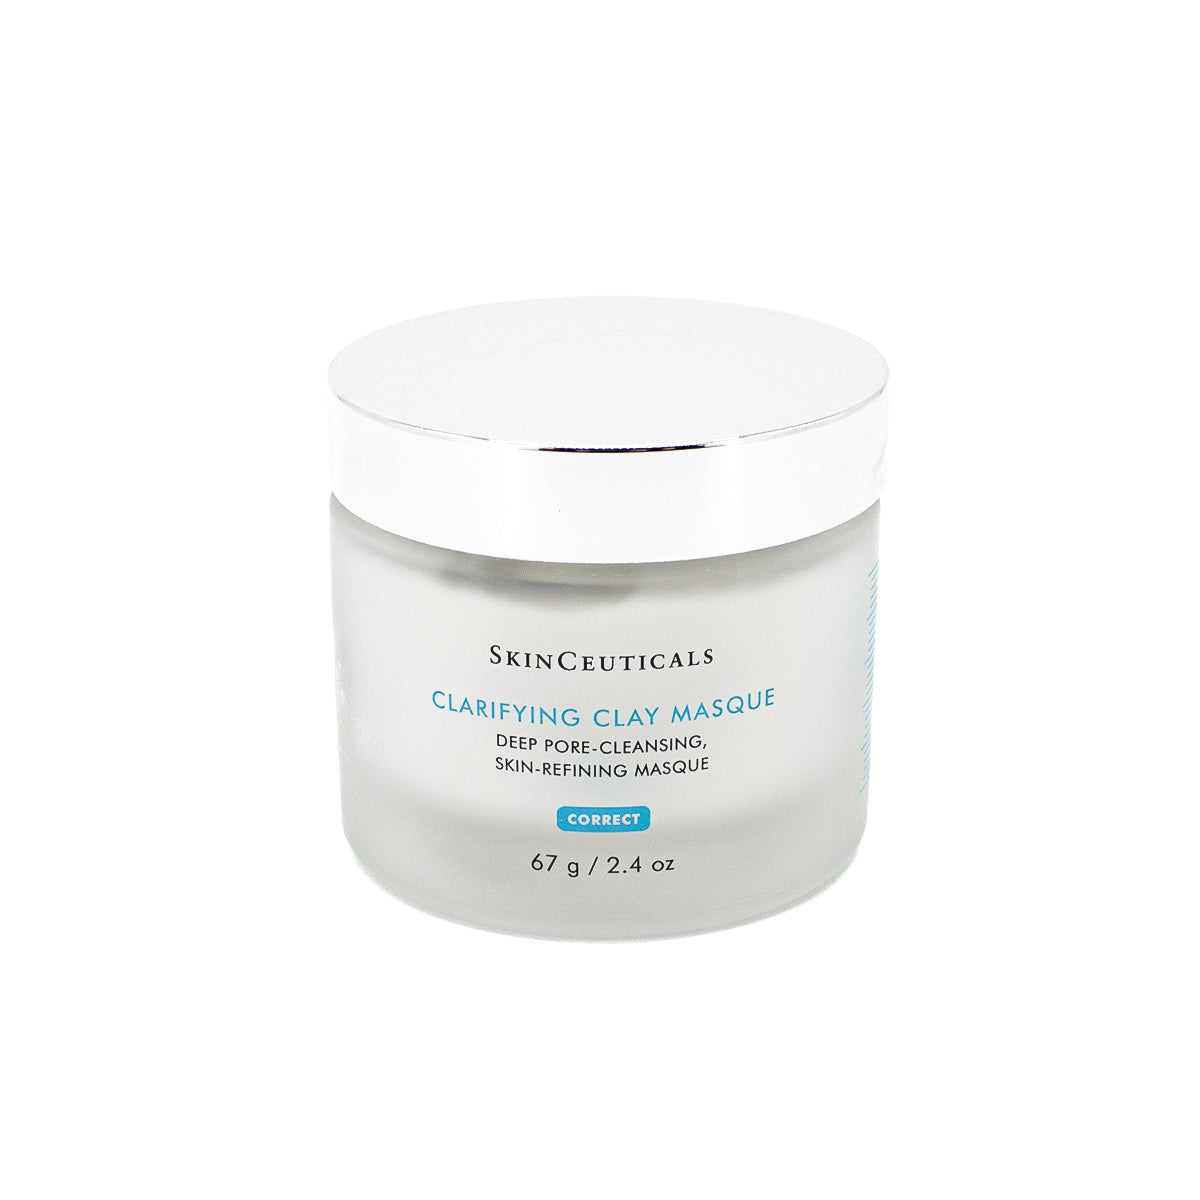 SkinCeuticals Clarifying Clay Masque 2.4oz - Missing Box